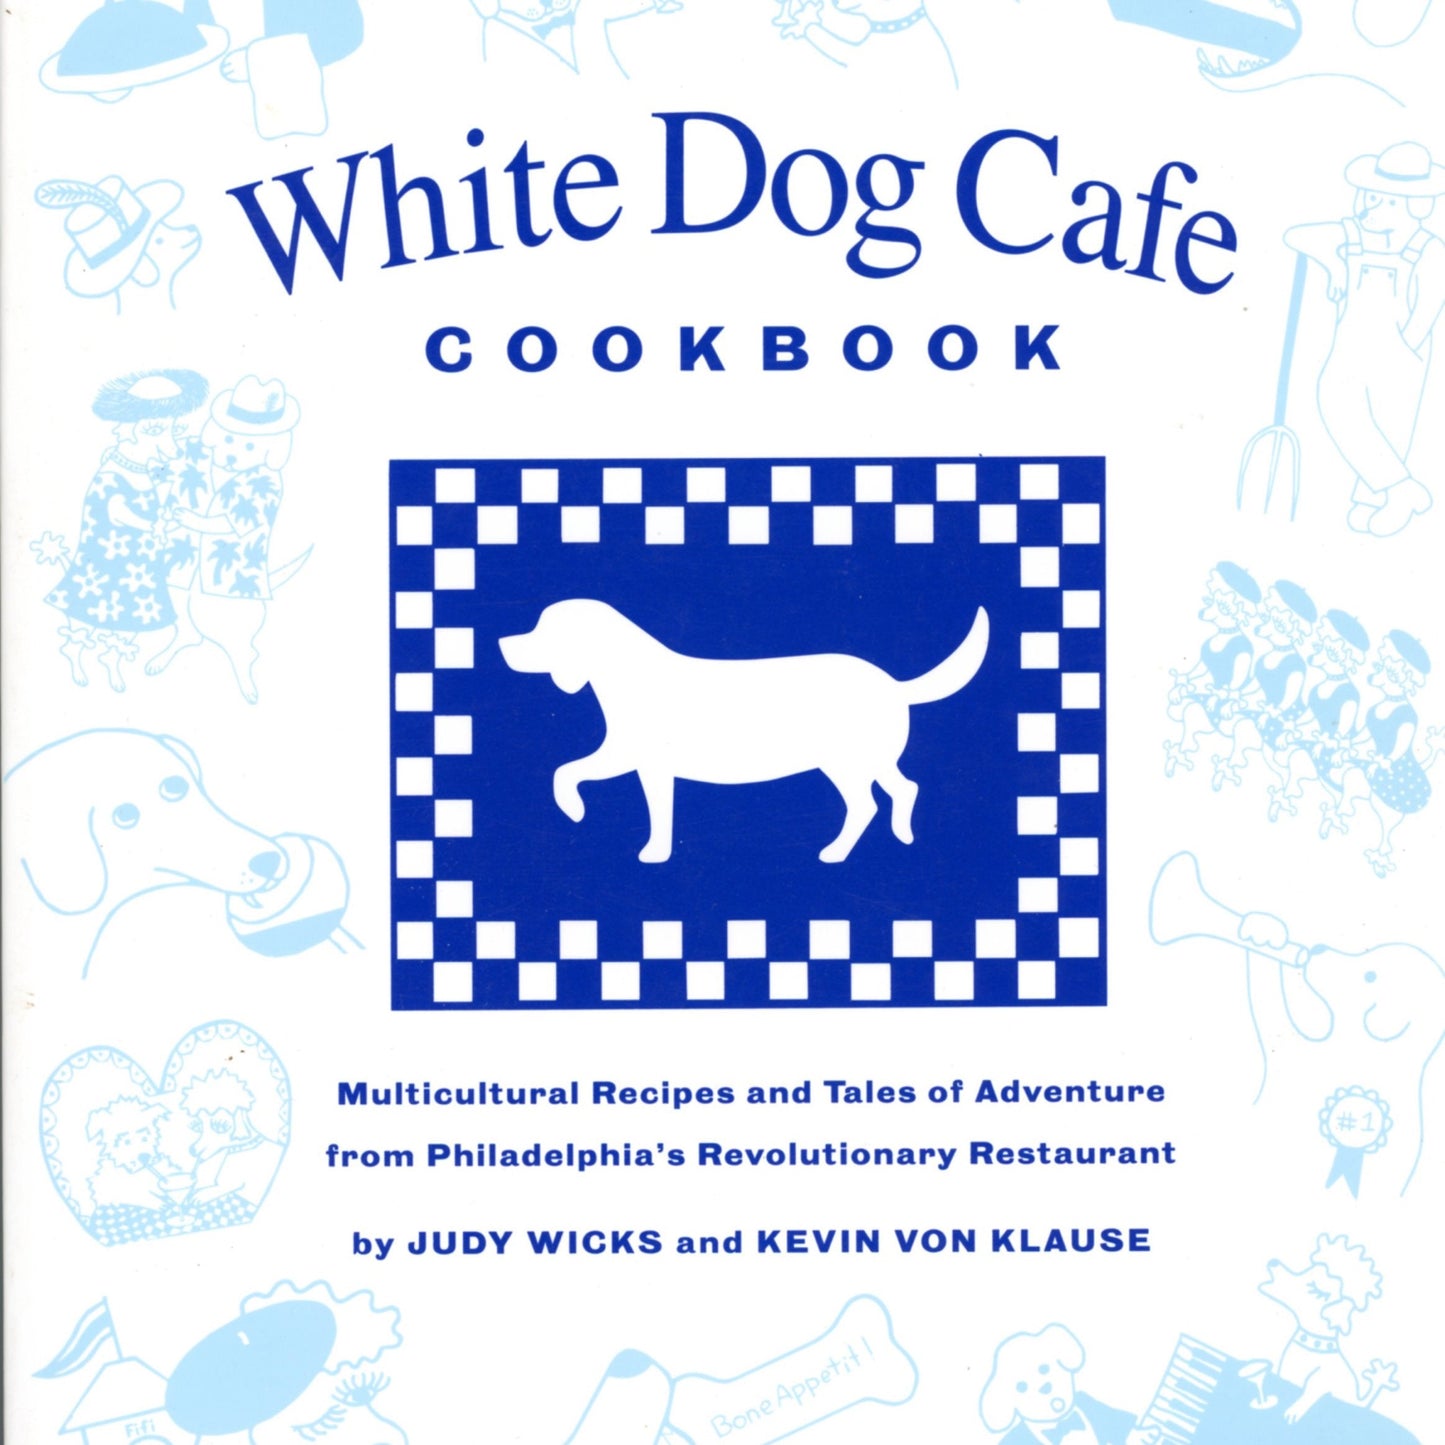 WHITE DOG CAFE COOKBOOK: Multicultural Recipes and Tales of Adventure from Philadelphia's Revolutionary Restaurant | ©1998